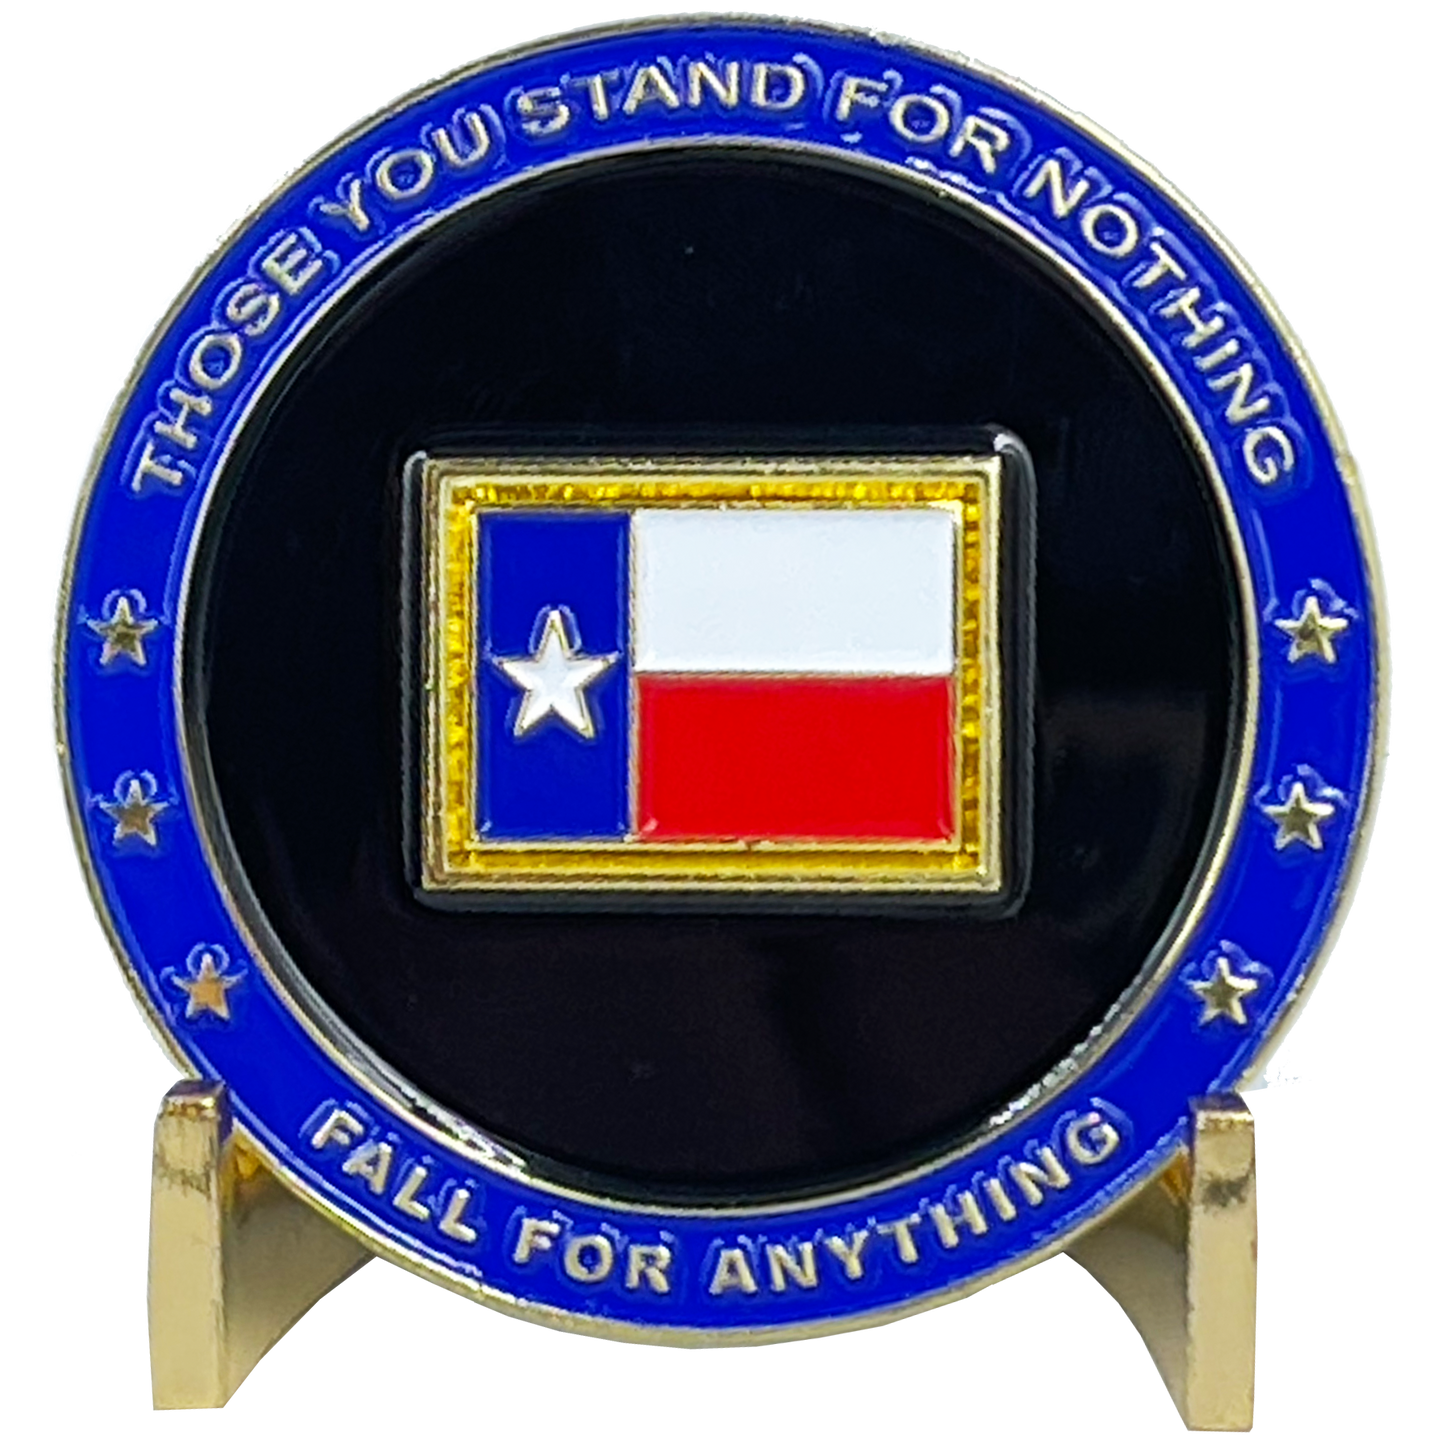 BL3-005 Texas BACKS THE BLUE Thin Blue Line Police Challenge Coin with free matching State Flag pin back the blue Sheriff trooper